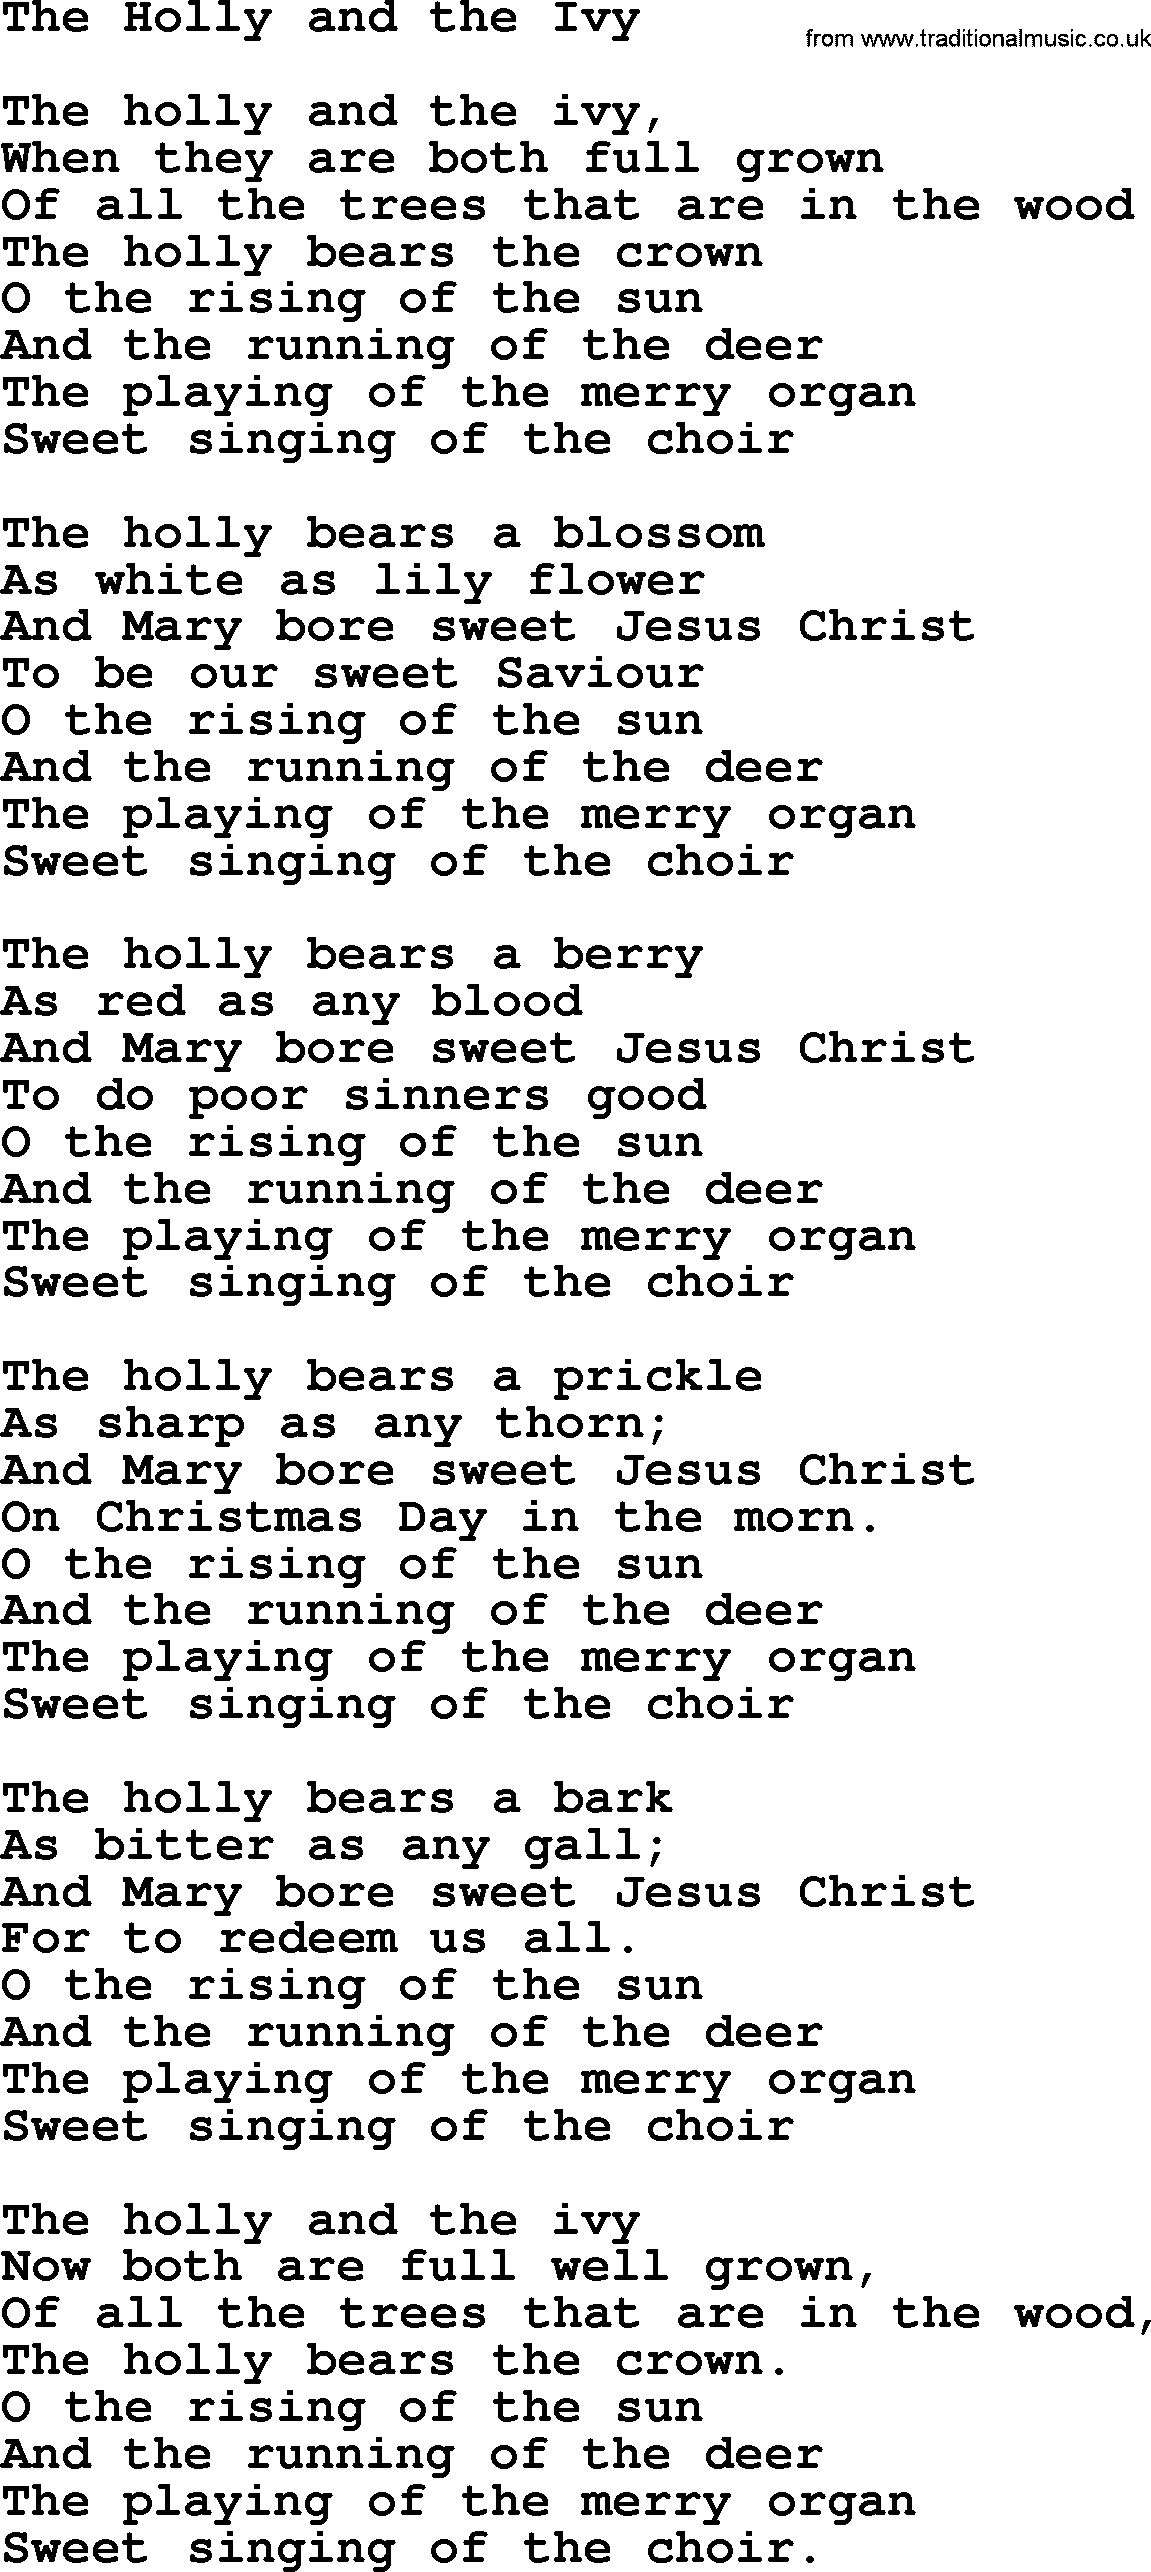 Christmas Hymns, Carols and Songs, title: The Holly And The Ivy - complete lyrics, and PDF